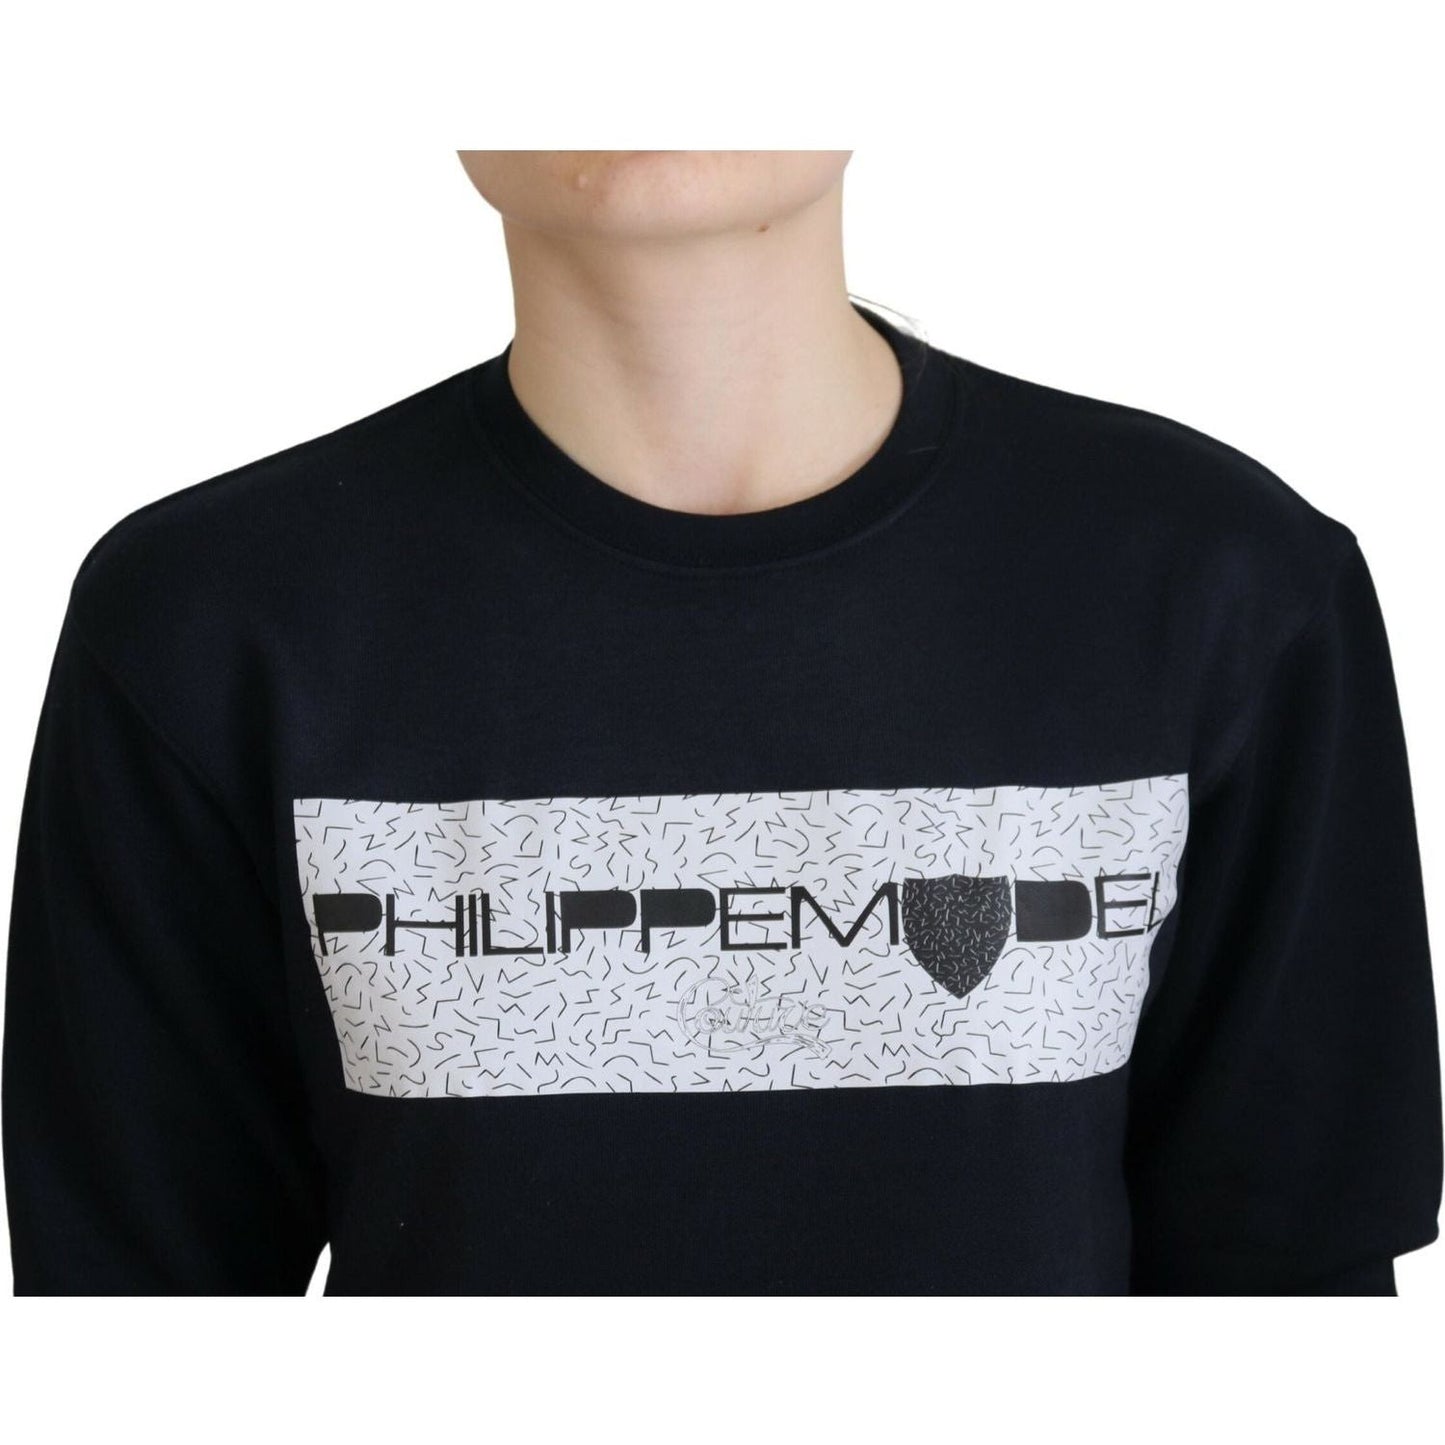 Philippe Model Chic Black Printed Cotton Sweater black-printed-long-sleeves-pullover-sweater